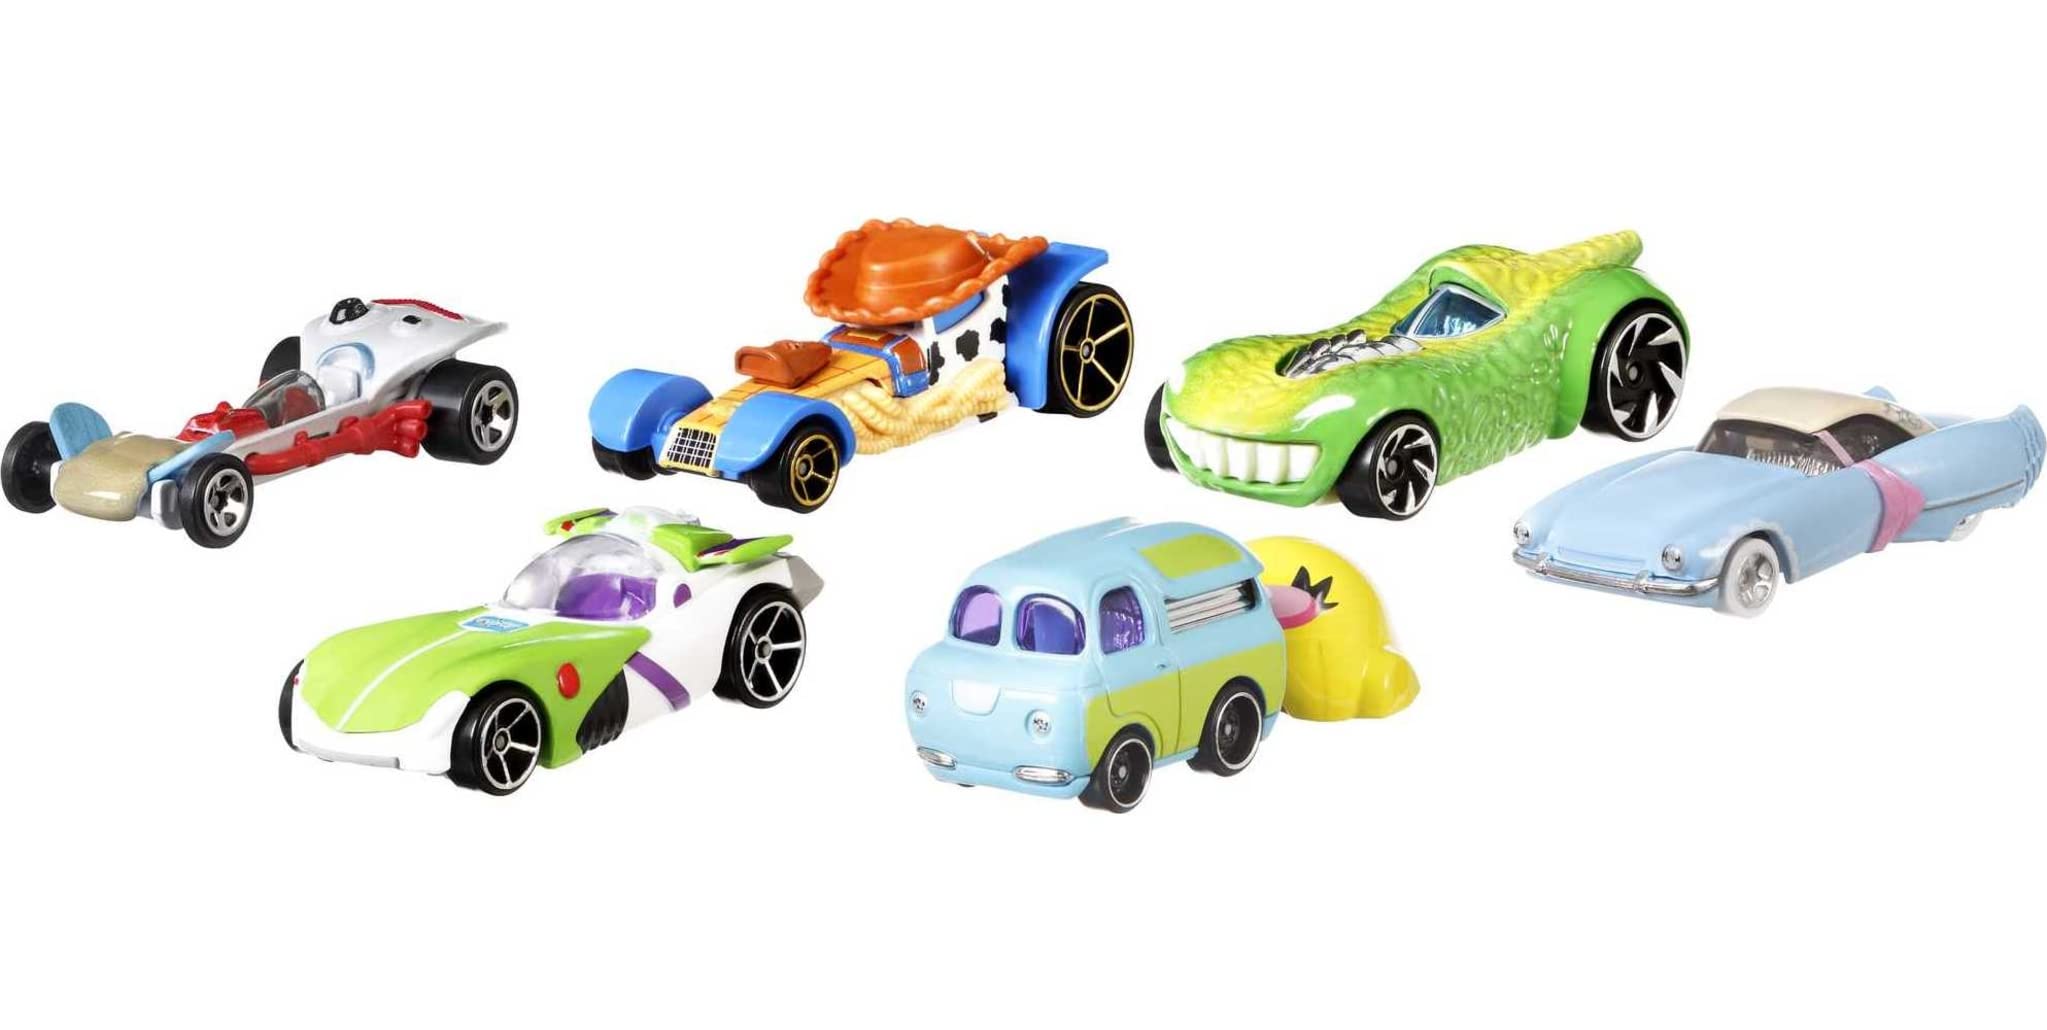 Hot Wheels Disney and Pixar Toy Story 4 Bundle of 6 1:64 Scale Character Cars: Woody, Buzz, Forky, Bo Beep, Rex & Ducky & Bunny [Amazon Exclusive]